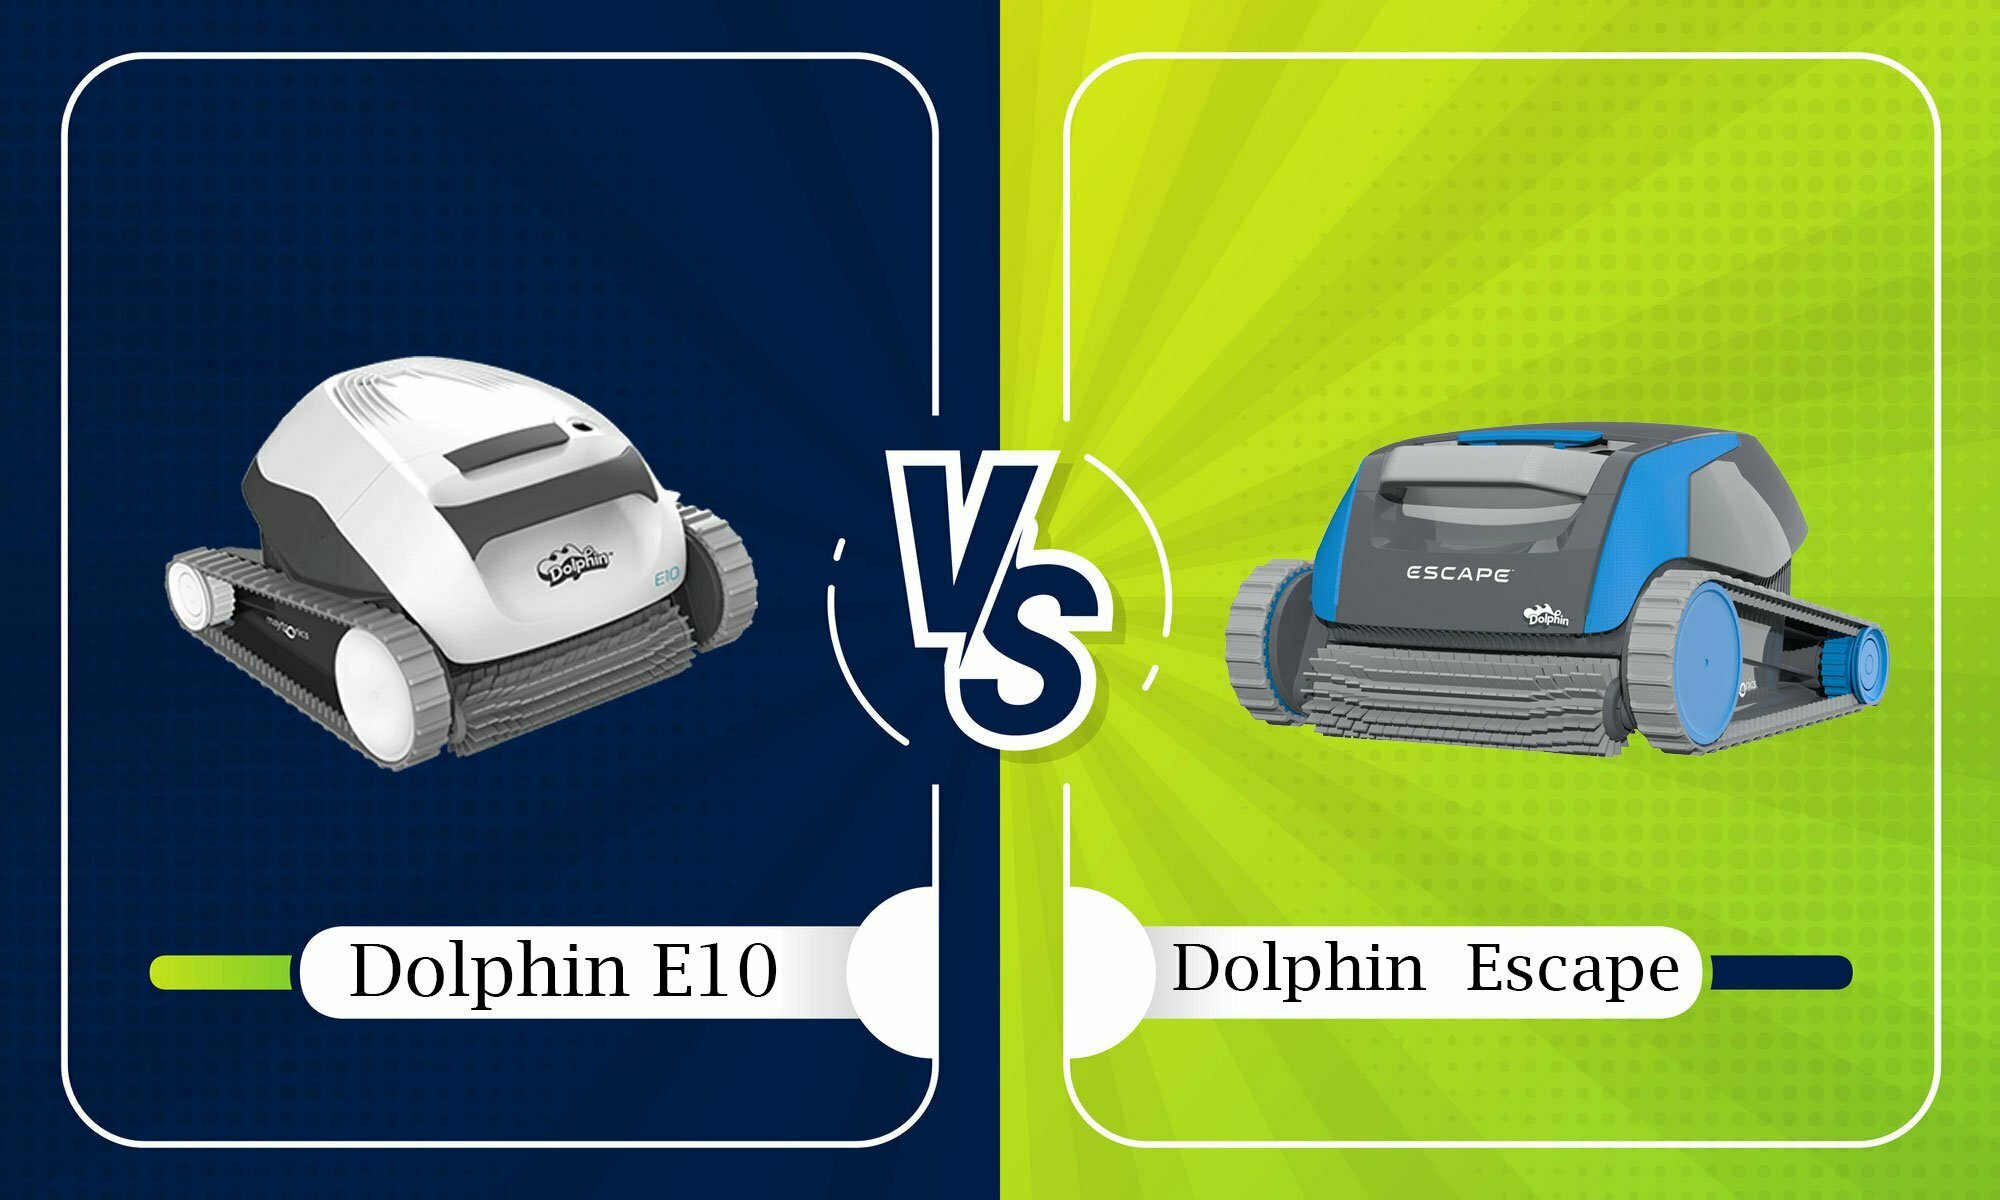 Dolphin Escape vs E10 whats the difference between them